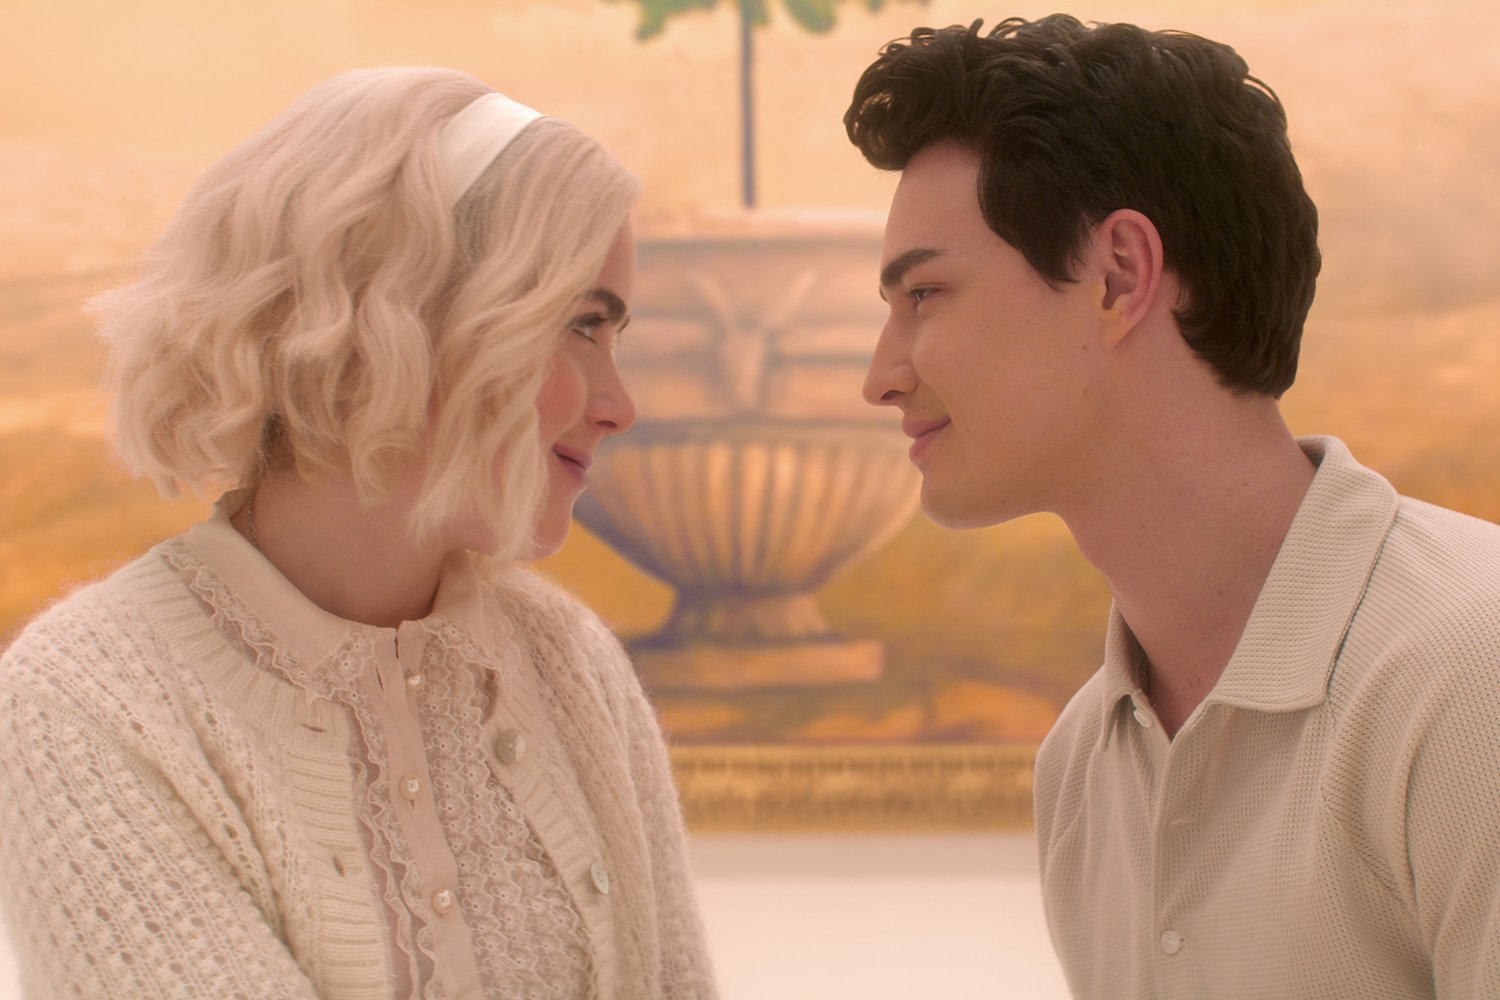 Kiernan Shipka as Sabrina and Gavin Leatherwood as Nick in Chilling Adventures of Sabrina before the Riverdale crossover